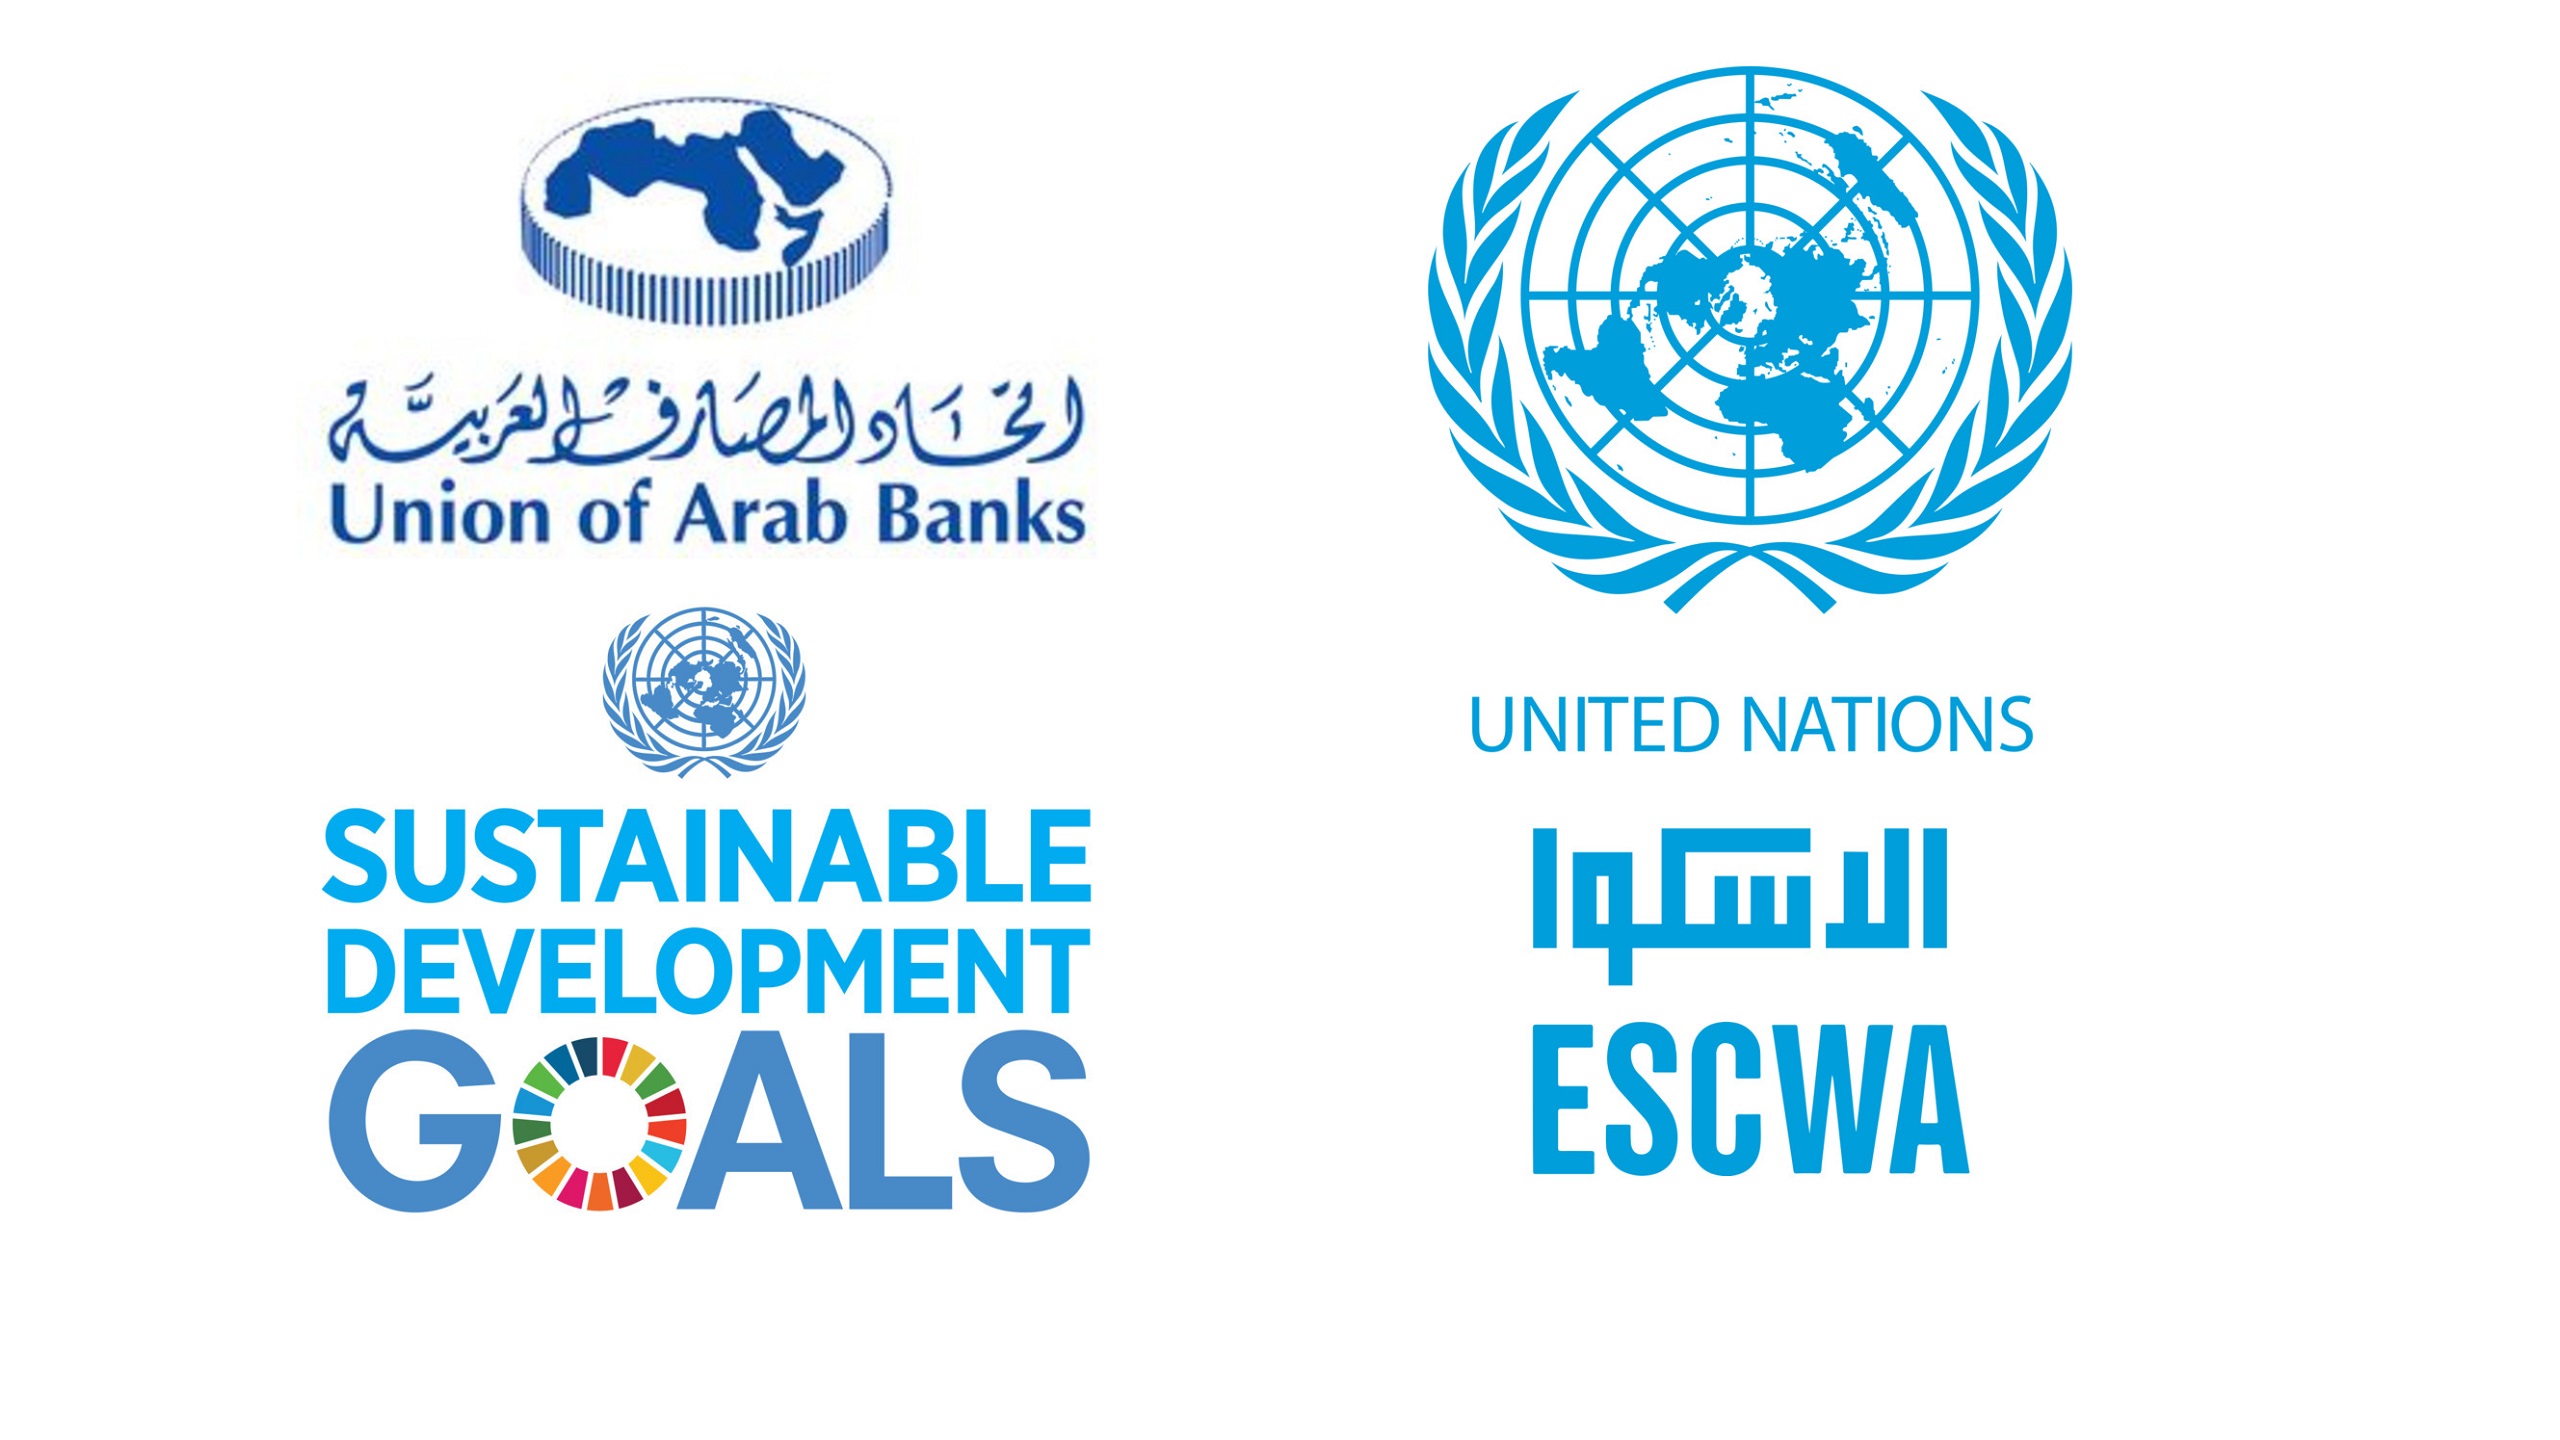 Union of Arab Banks Partners With UN Body To Commit $1 Trillion for Sustainable Development Goals